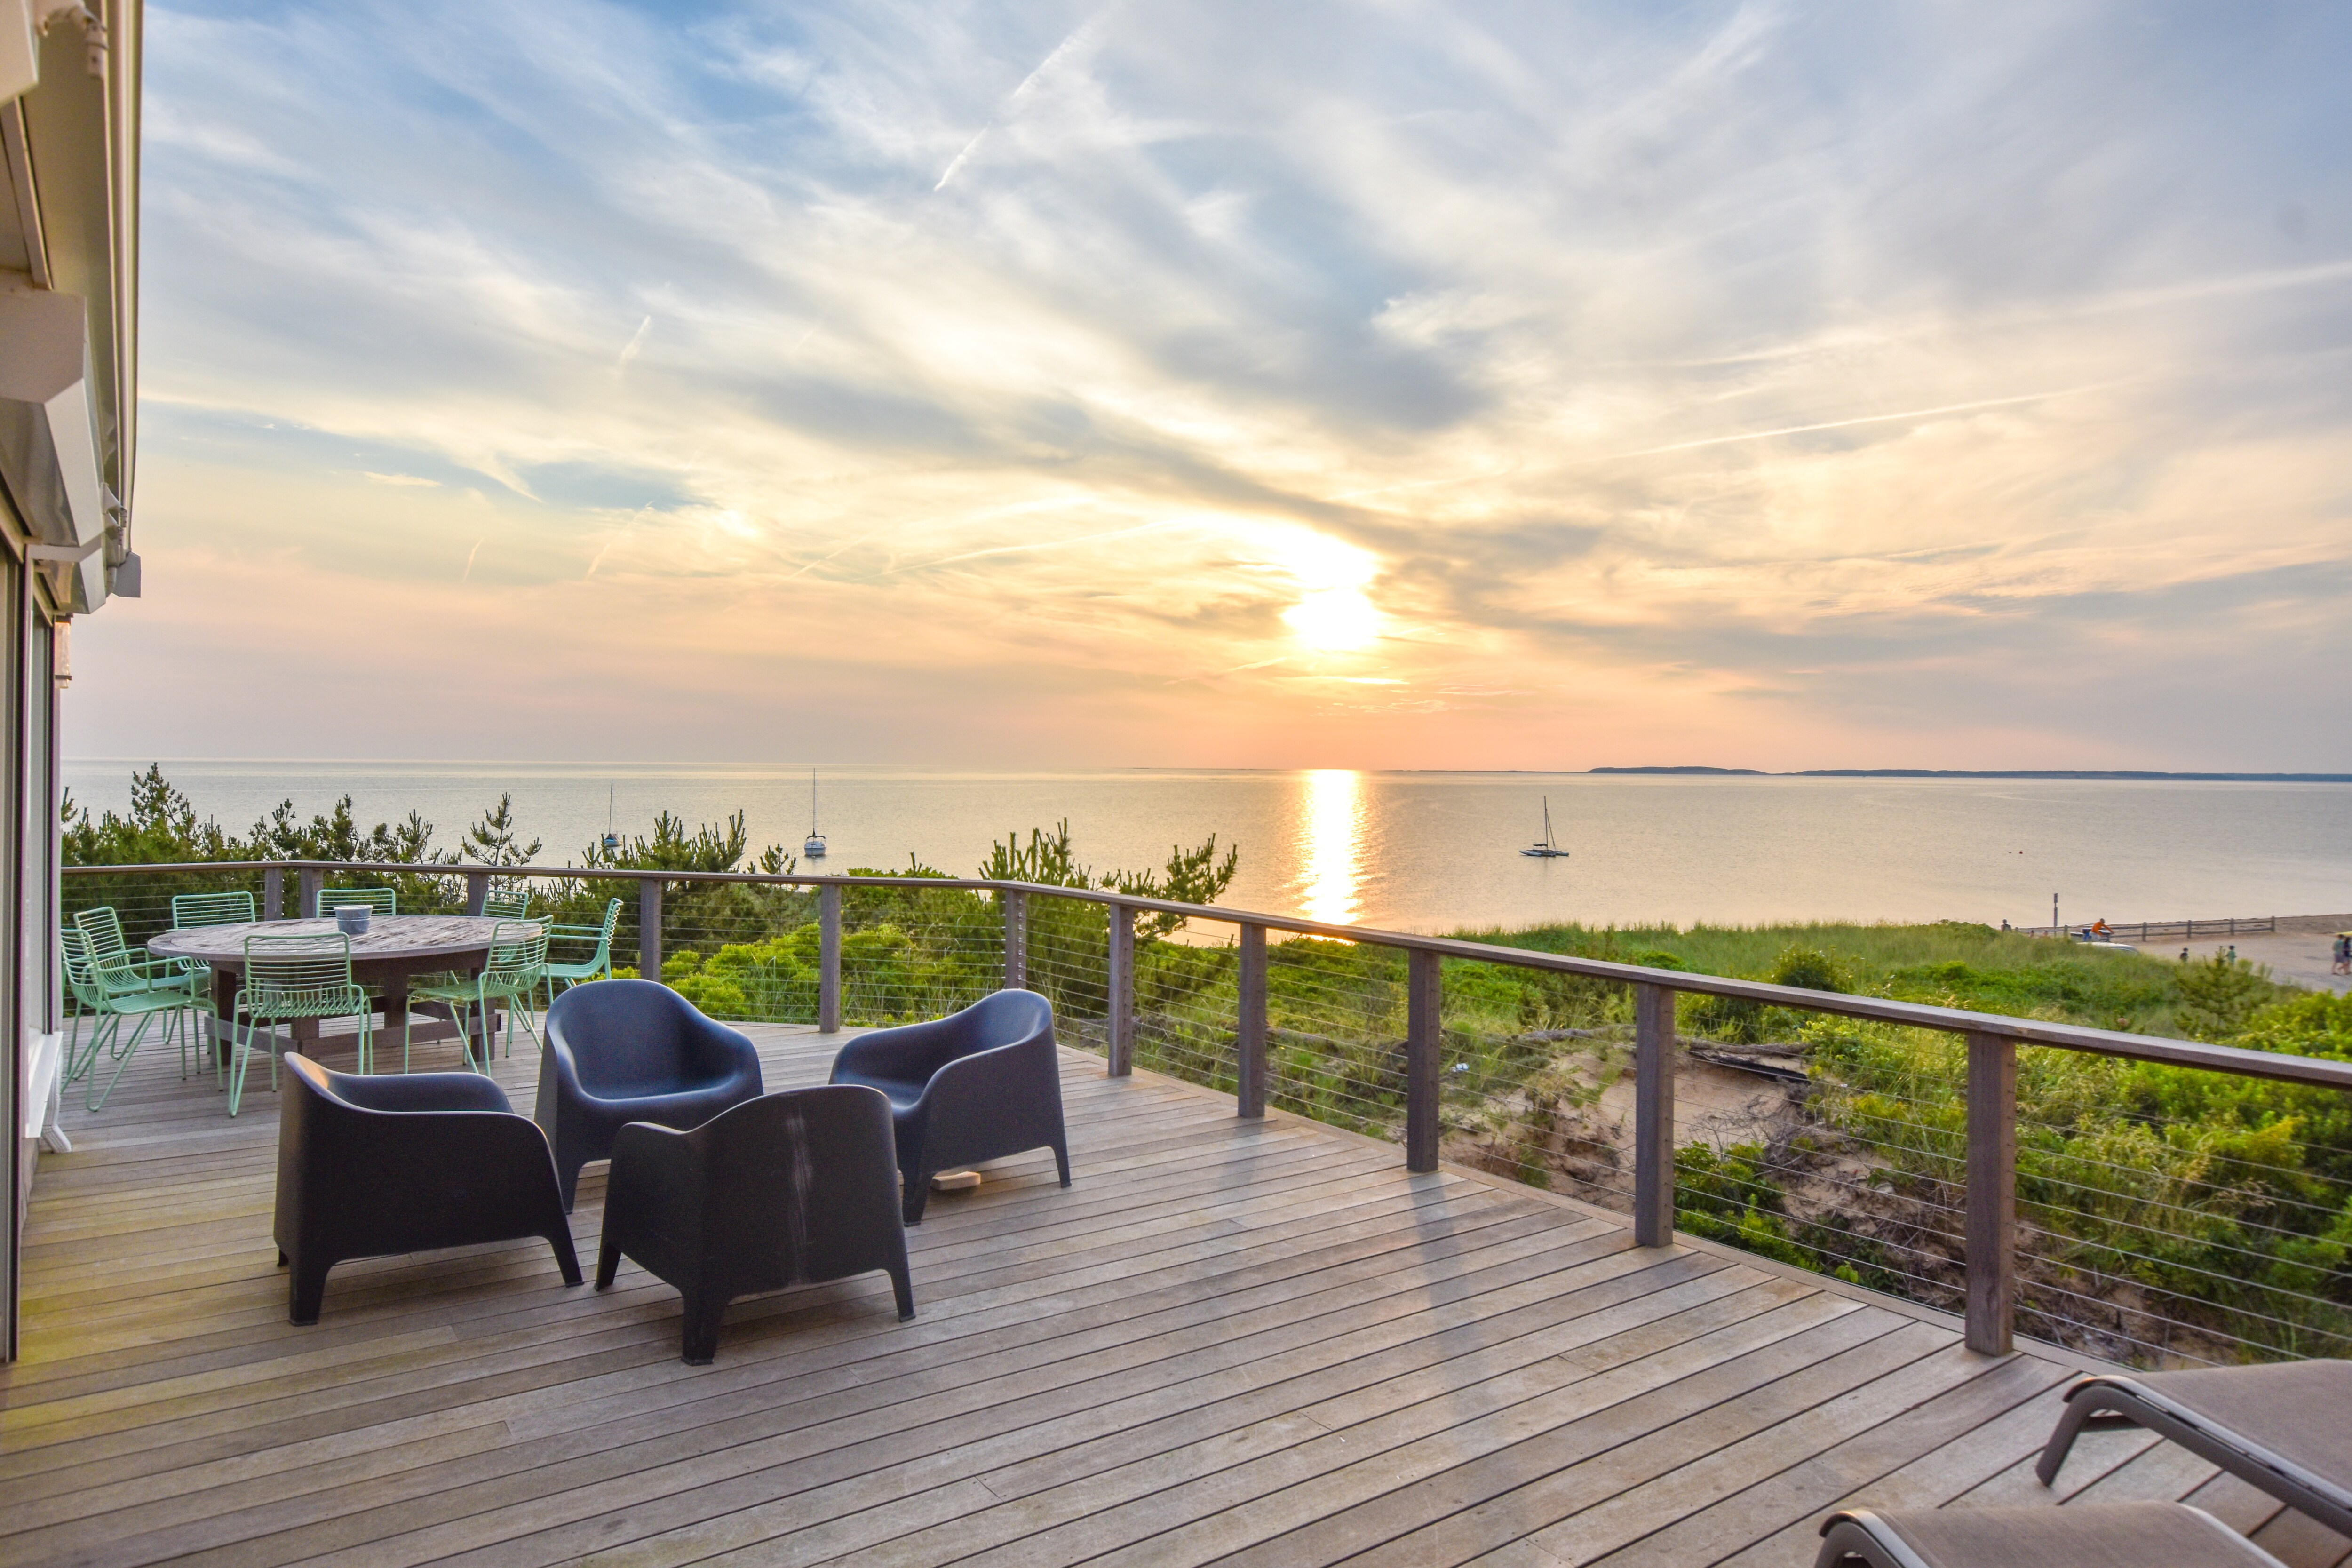 Property Image 1 - 14436: Gorgeous architectural waterfront property, wrap around deck with stunning views!